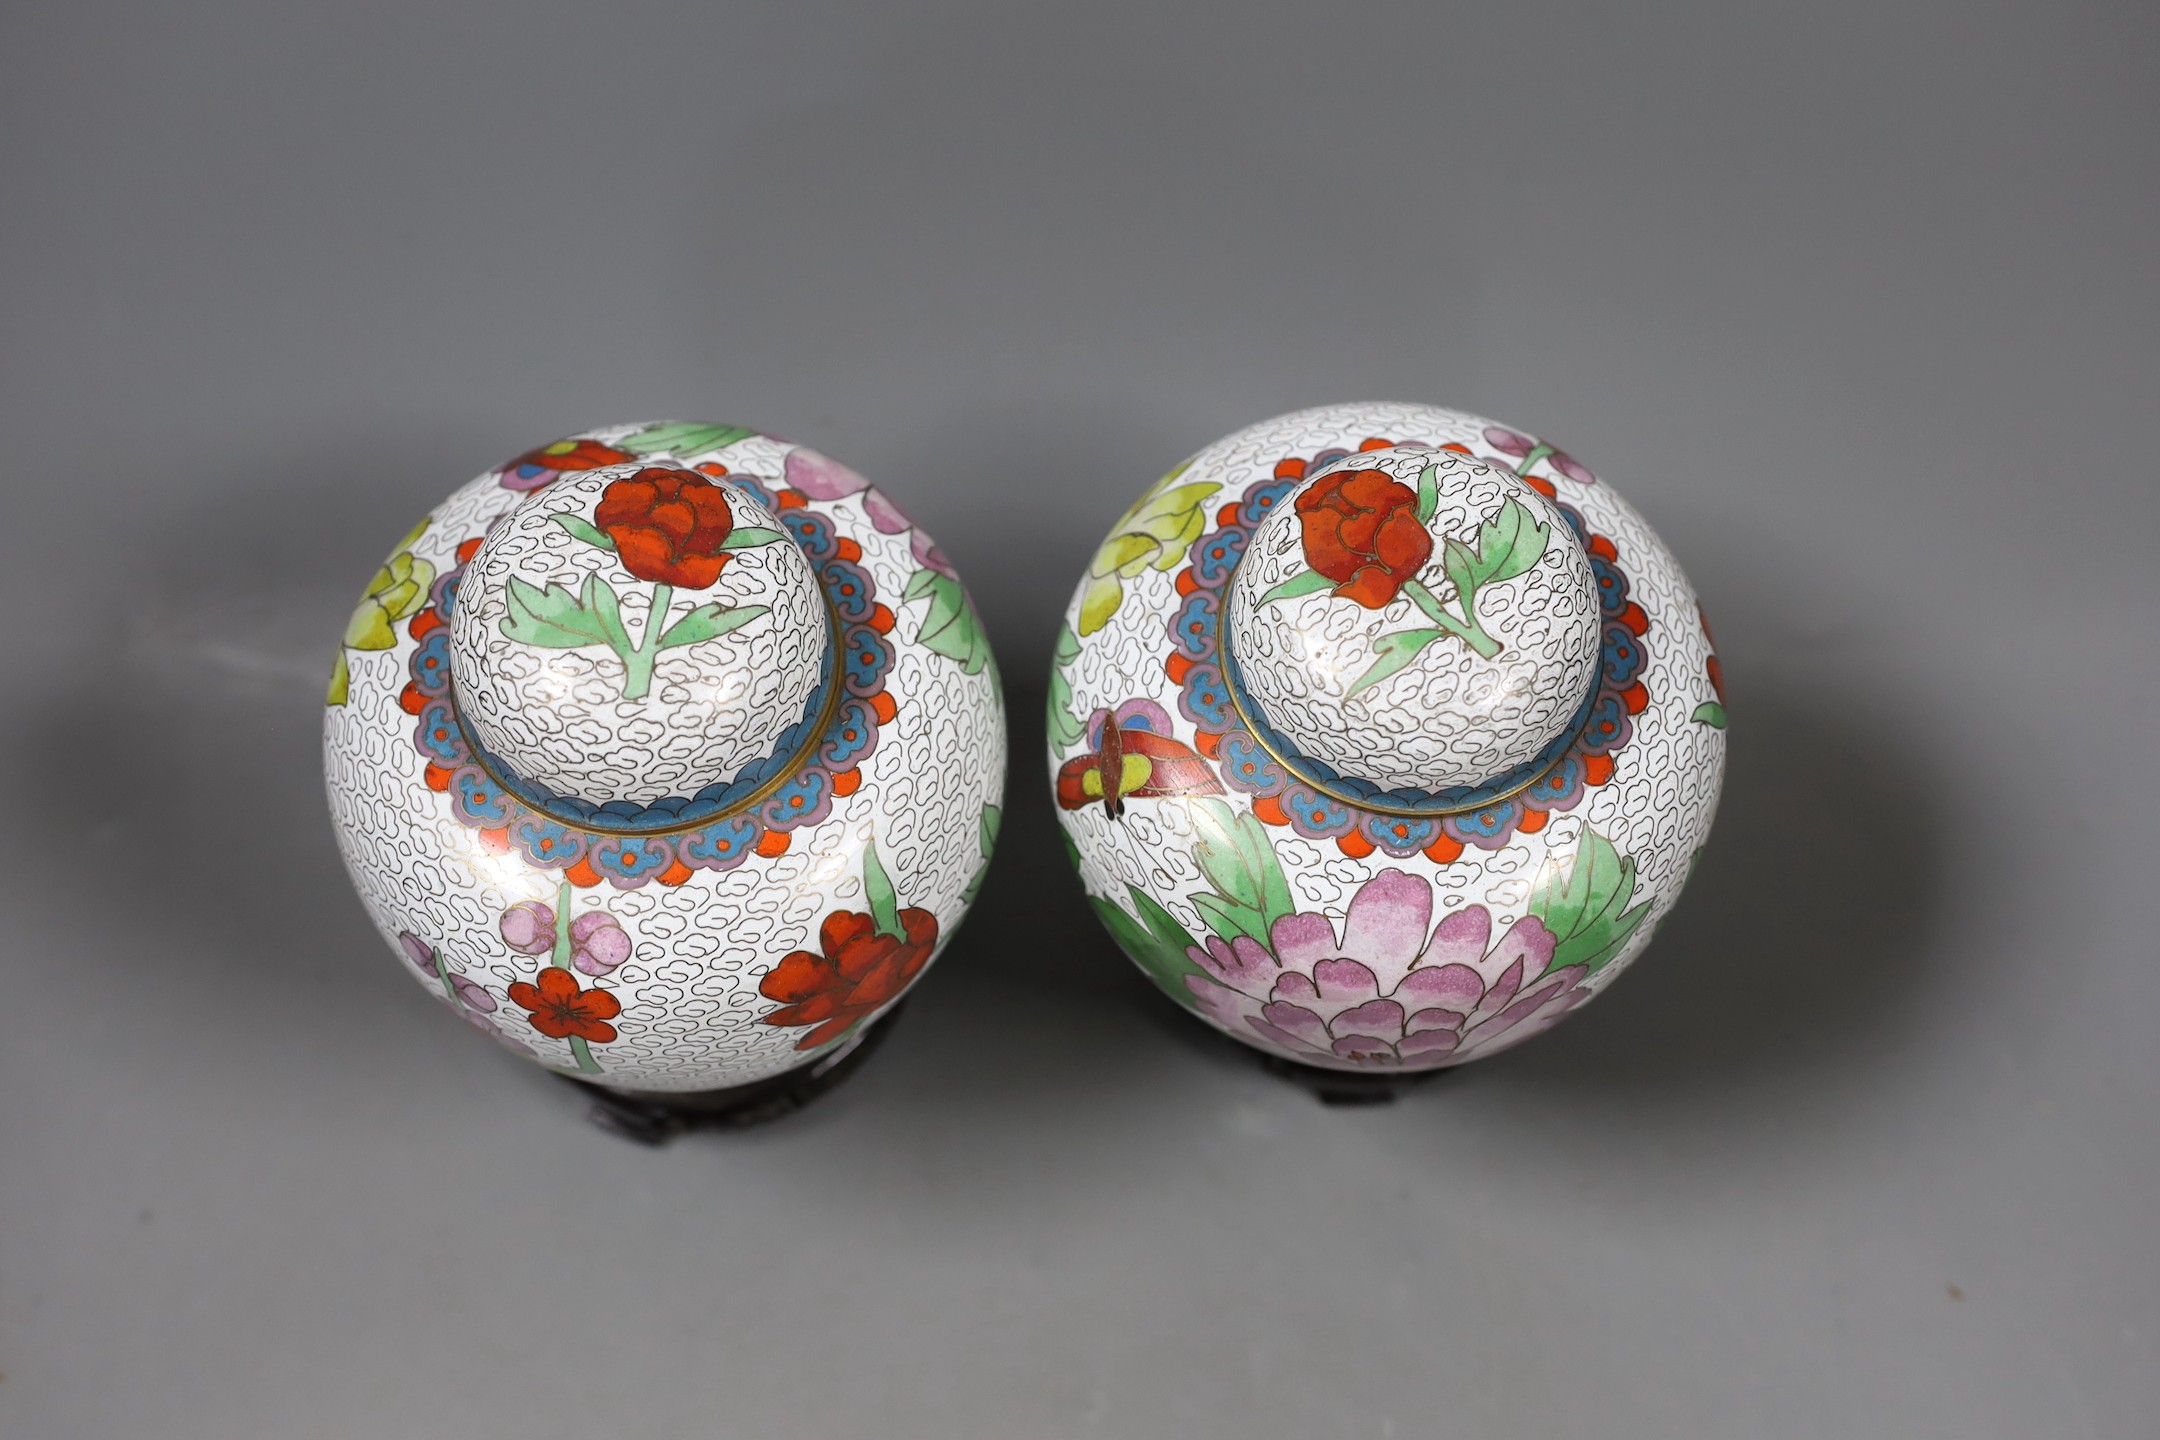 A pair of Chinese cloisonné enamel jars and covers on stands, total height 15.5 cm - Image 3 of 5